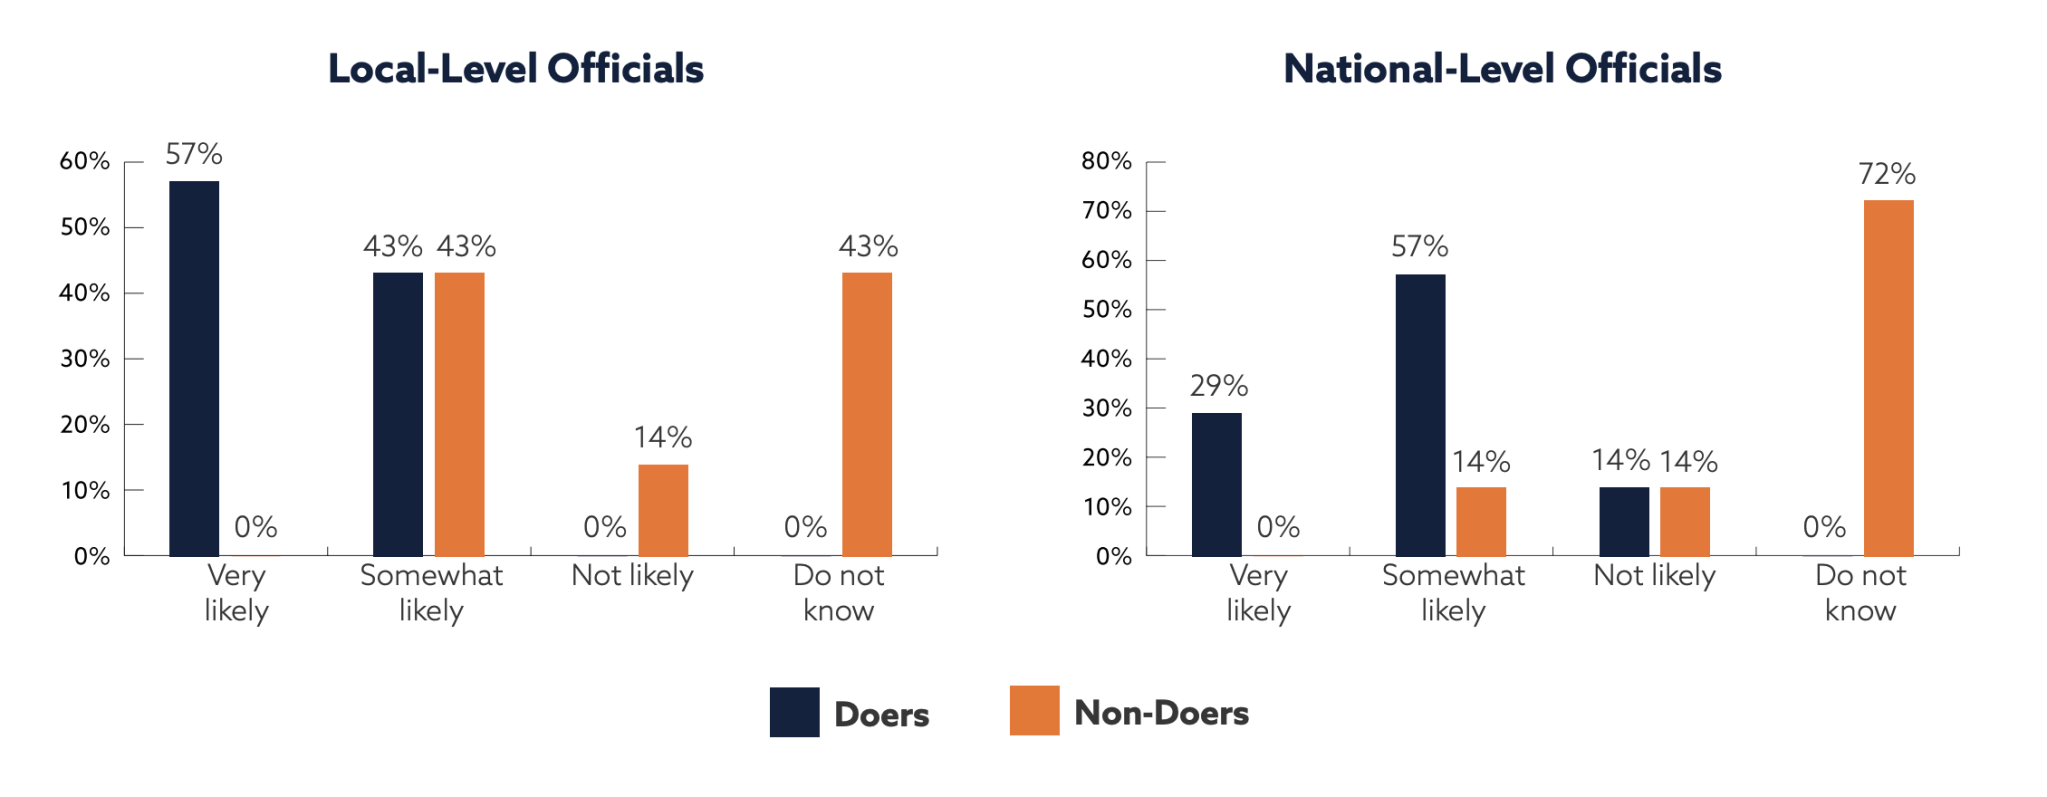 First bar chart: Local-level officials.  Doers: Very likely 57%; somewhat likely 43%; not likely 0%; do not know 0%.  Non-doers: Very likely 0%; somewhat likely 43%; not likely 14%; do not know 43%.

Second bar chart: National-level officials.  Doers: Very likely 29%; somewhat likely 57%; not likely 14%; do not know 0%.  Non-doers: Very likely 0%; somewhat likely 14%; not likely 14%; do not know 72%.
